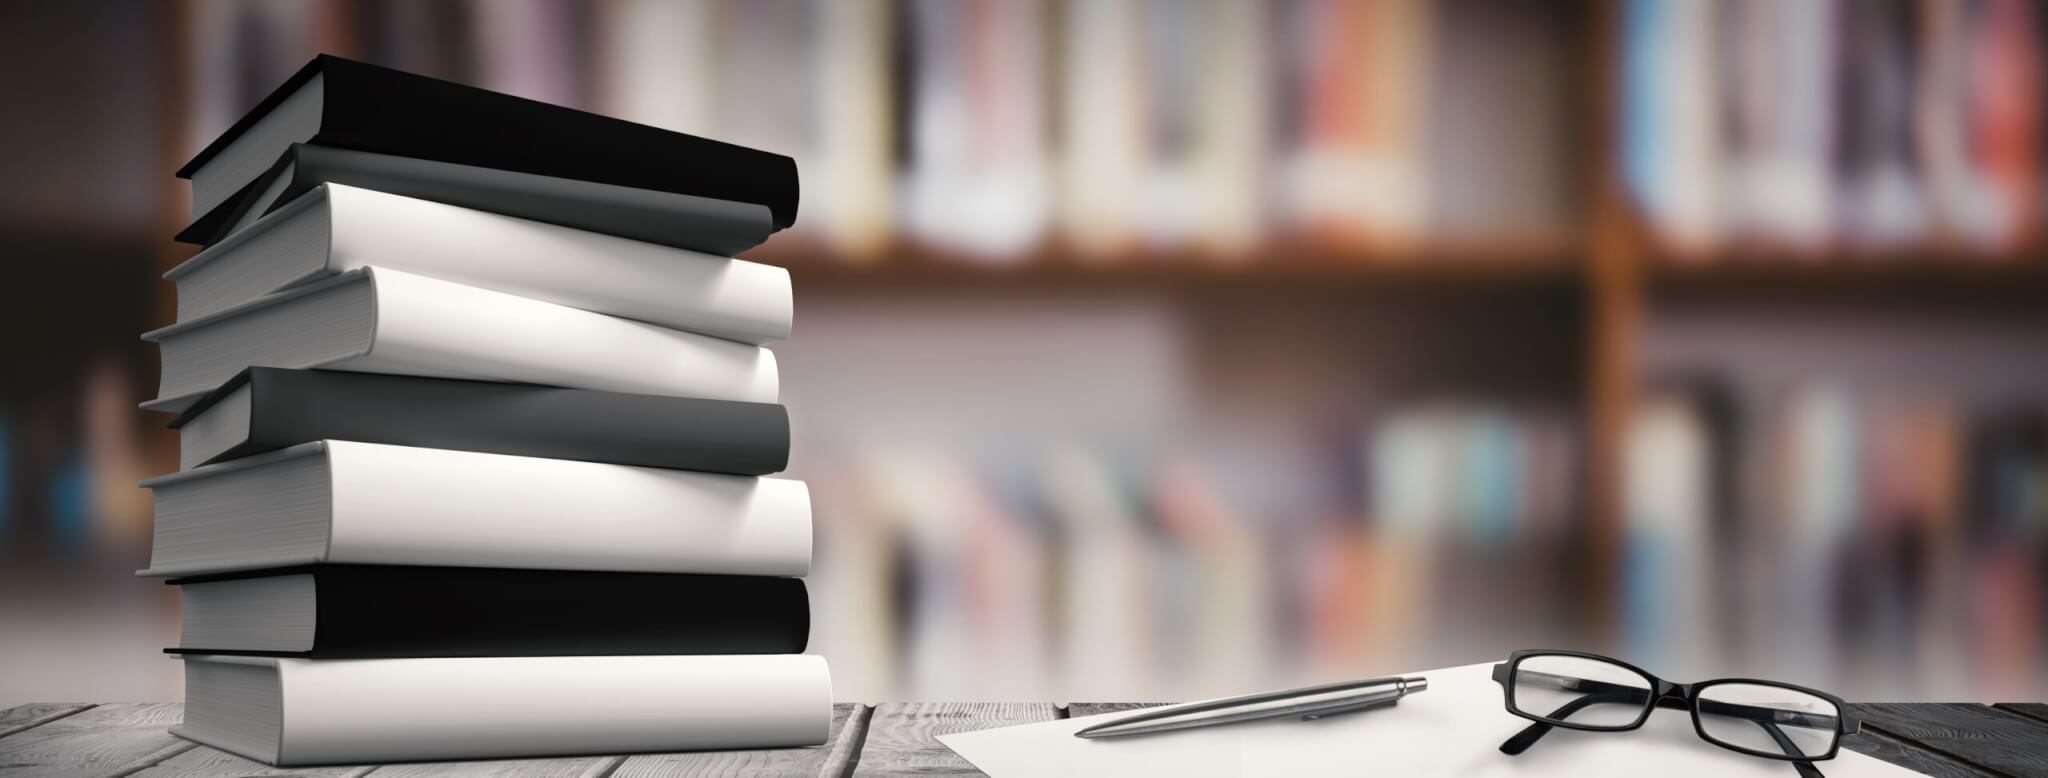 stack of books on desk with glasses